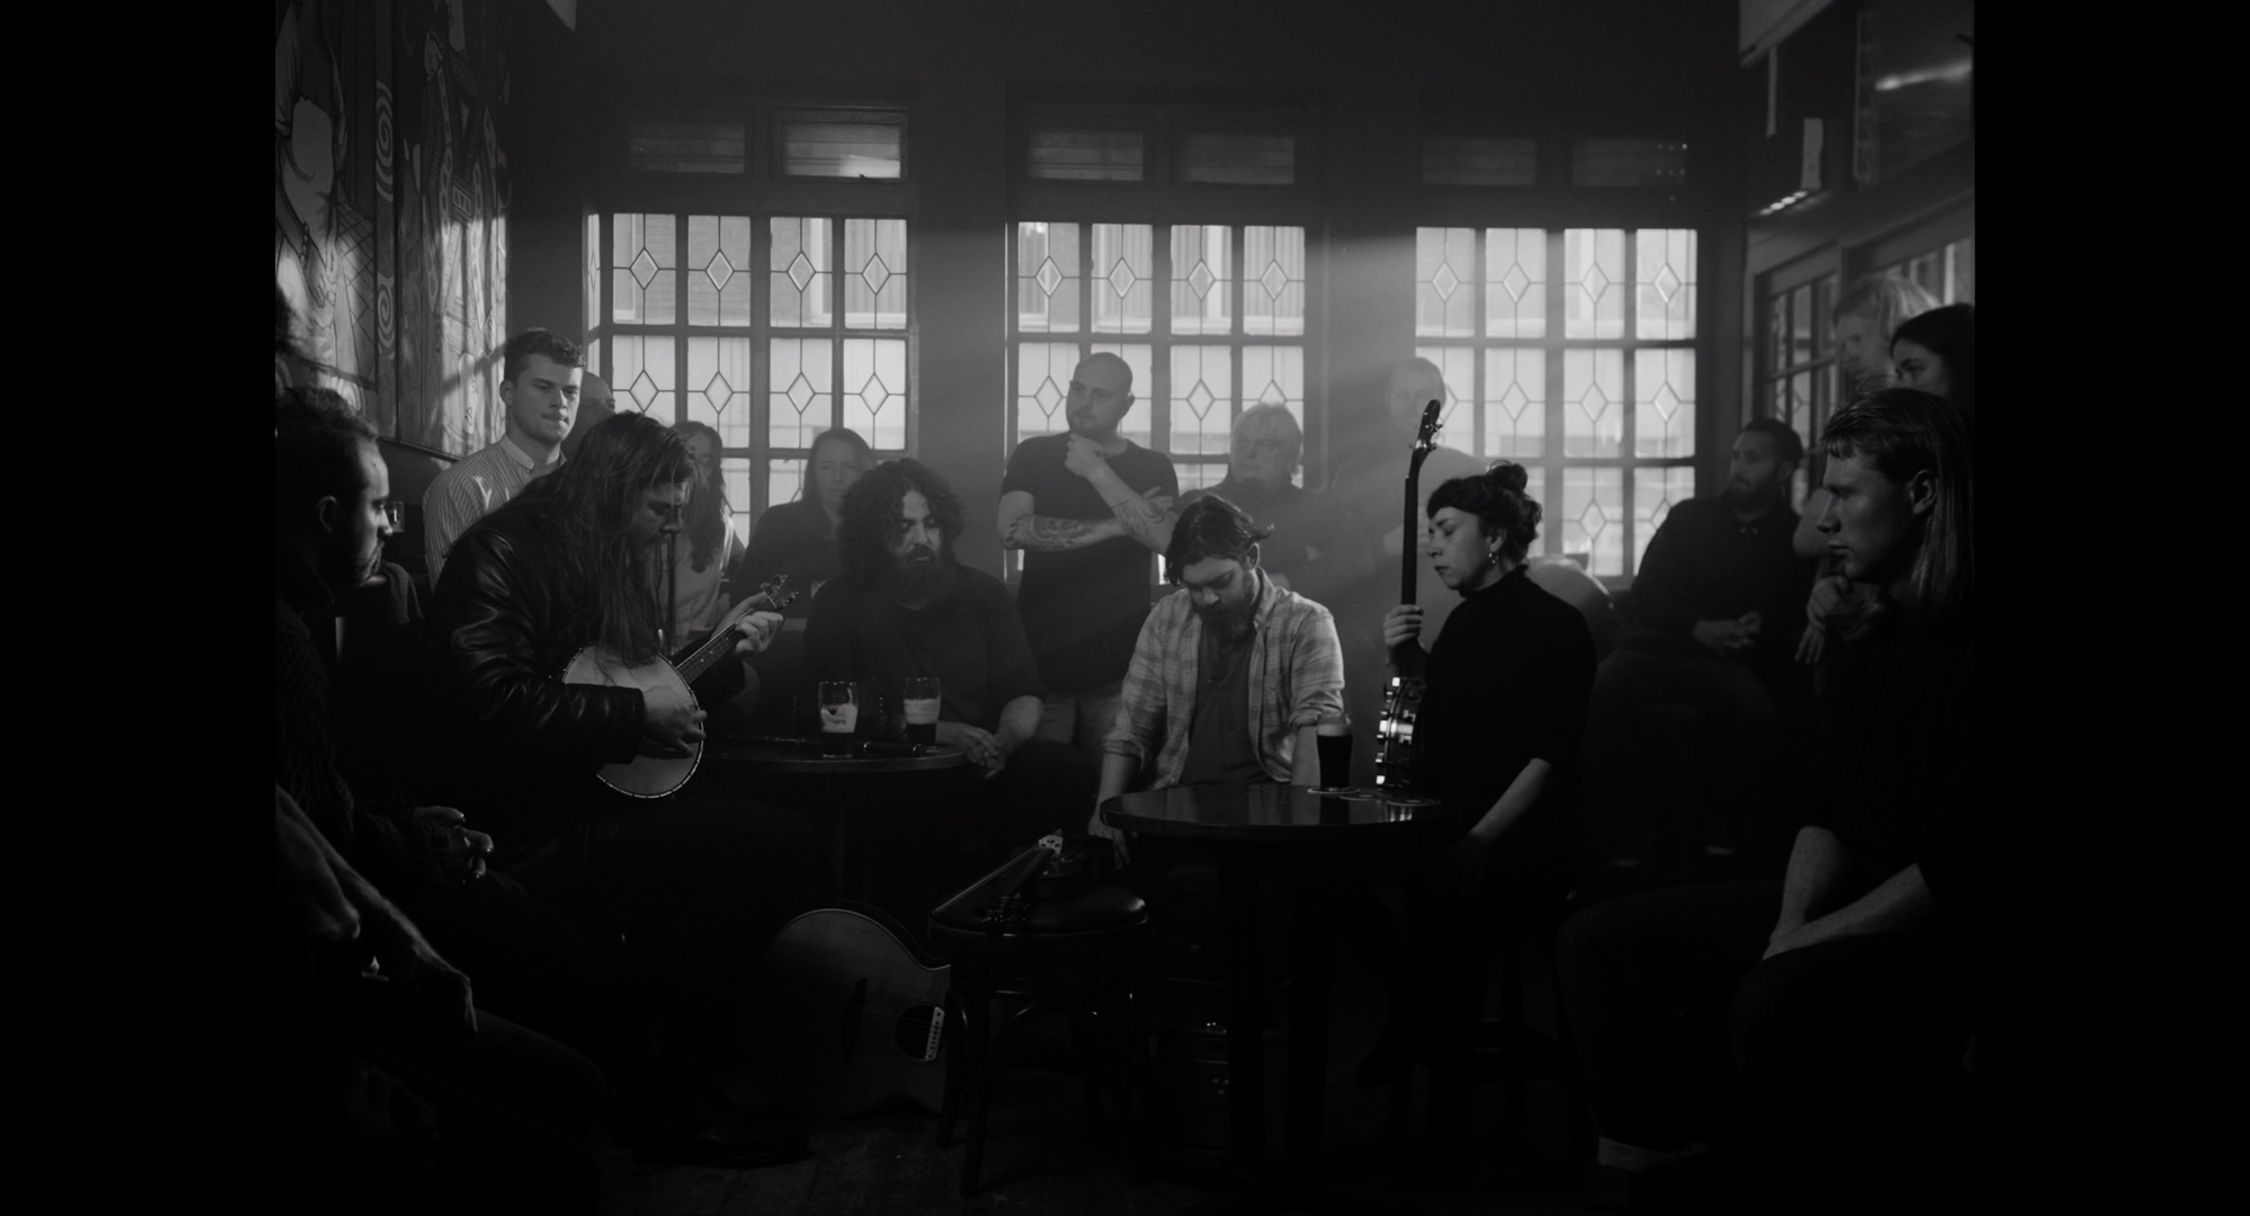 In a dimly lit pub, a group of people are gathered, some sitting and some standing. The focus is on a person playing a banjo in the center, surrounded by onlookers who are attentively listening or waiting their turn to perform. The mood is casual and communal, typical of an informal music session. The image is monochromatic, which adds a timeless and candid feel to the scene.